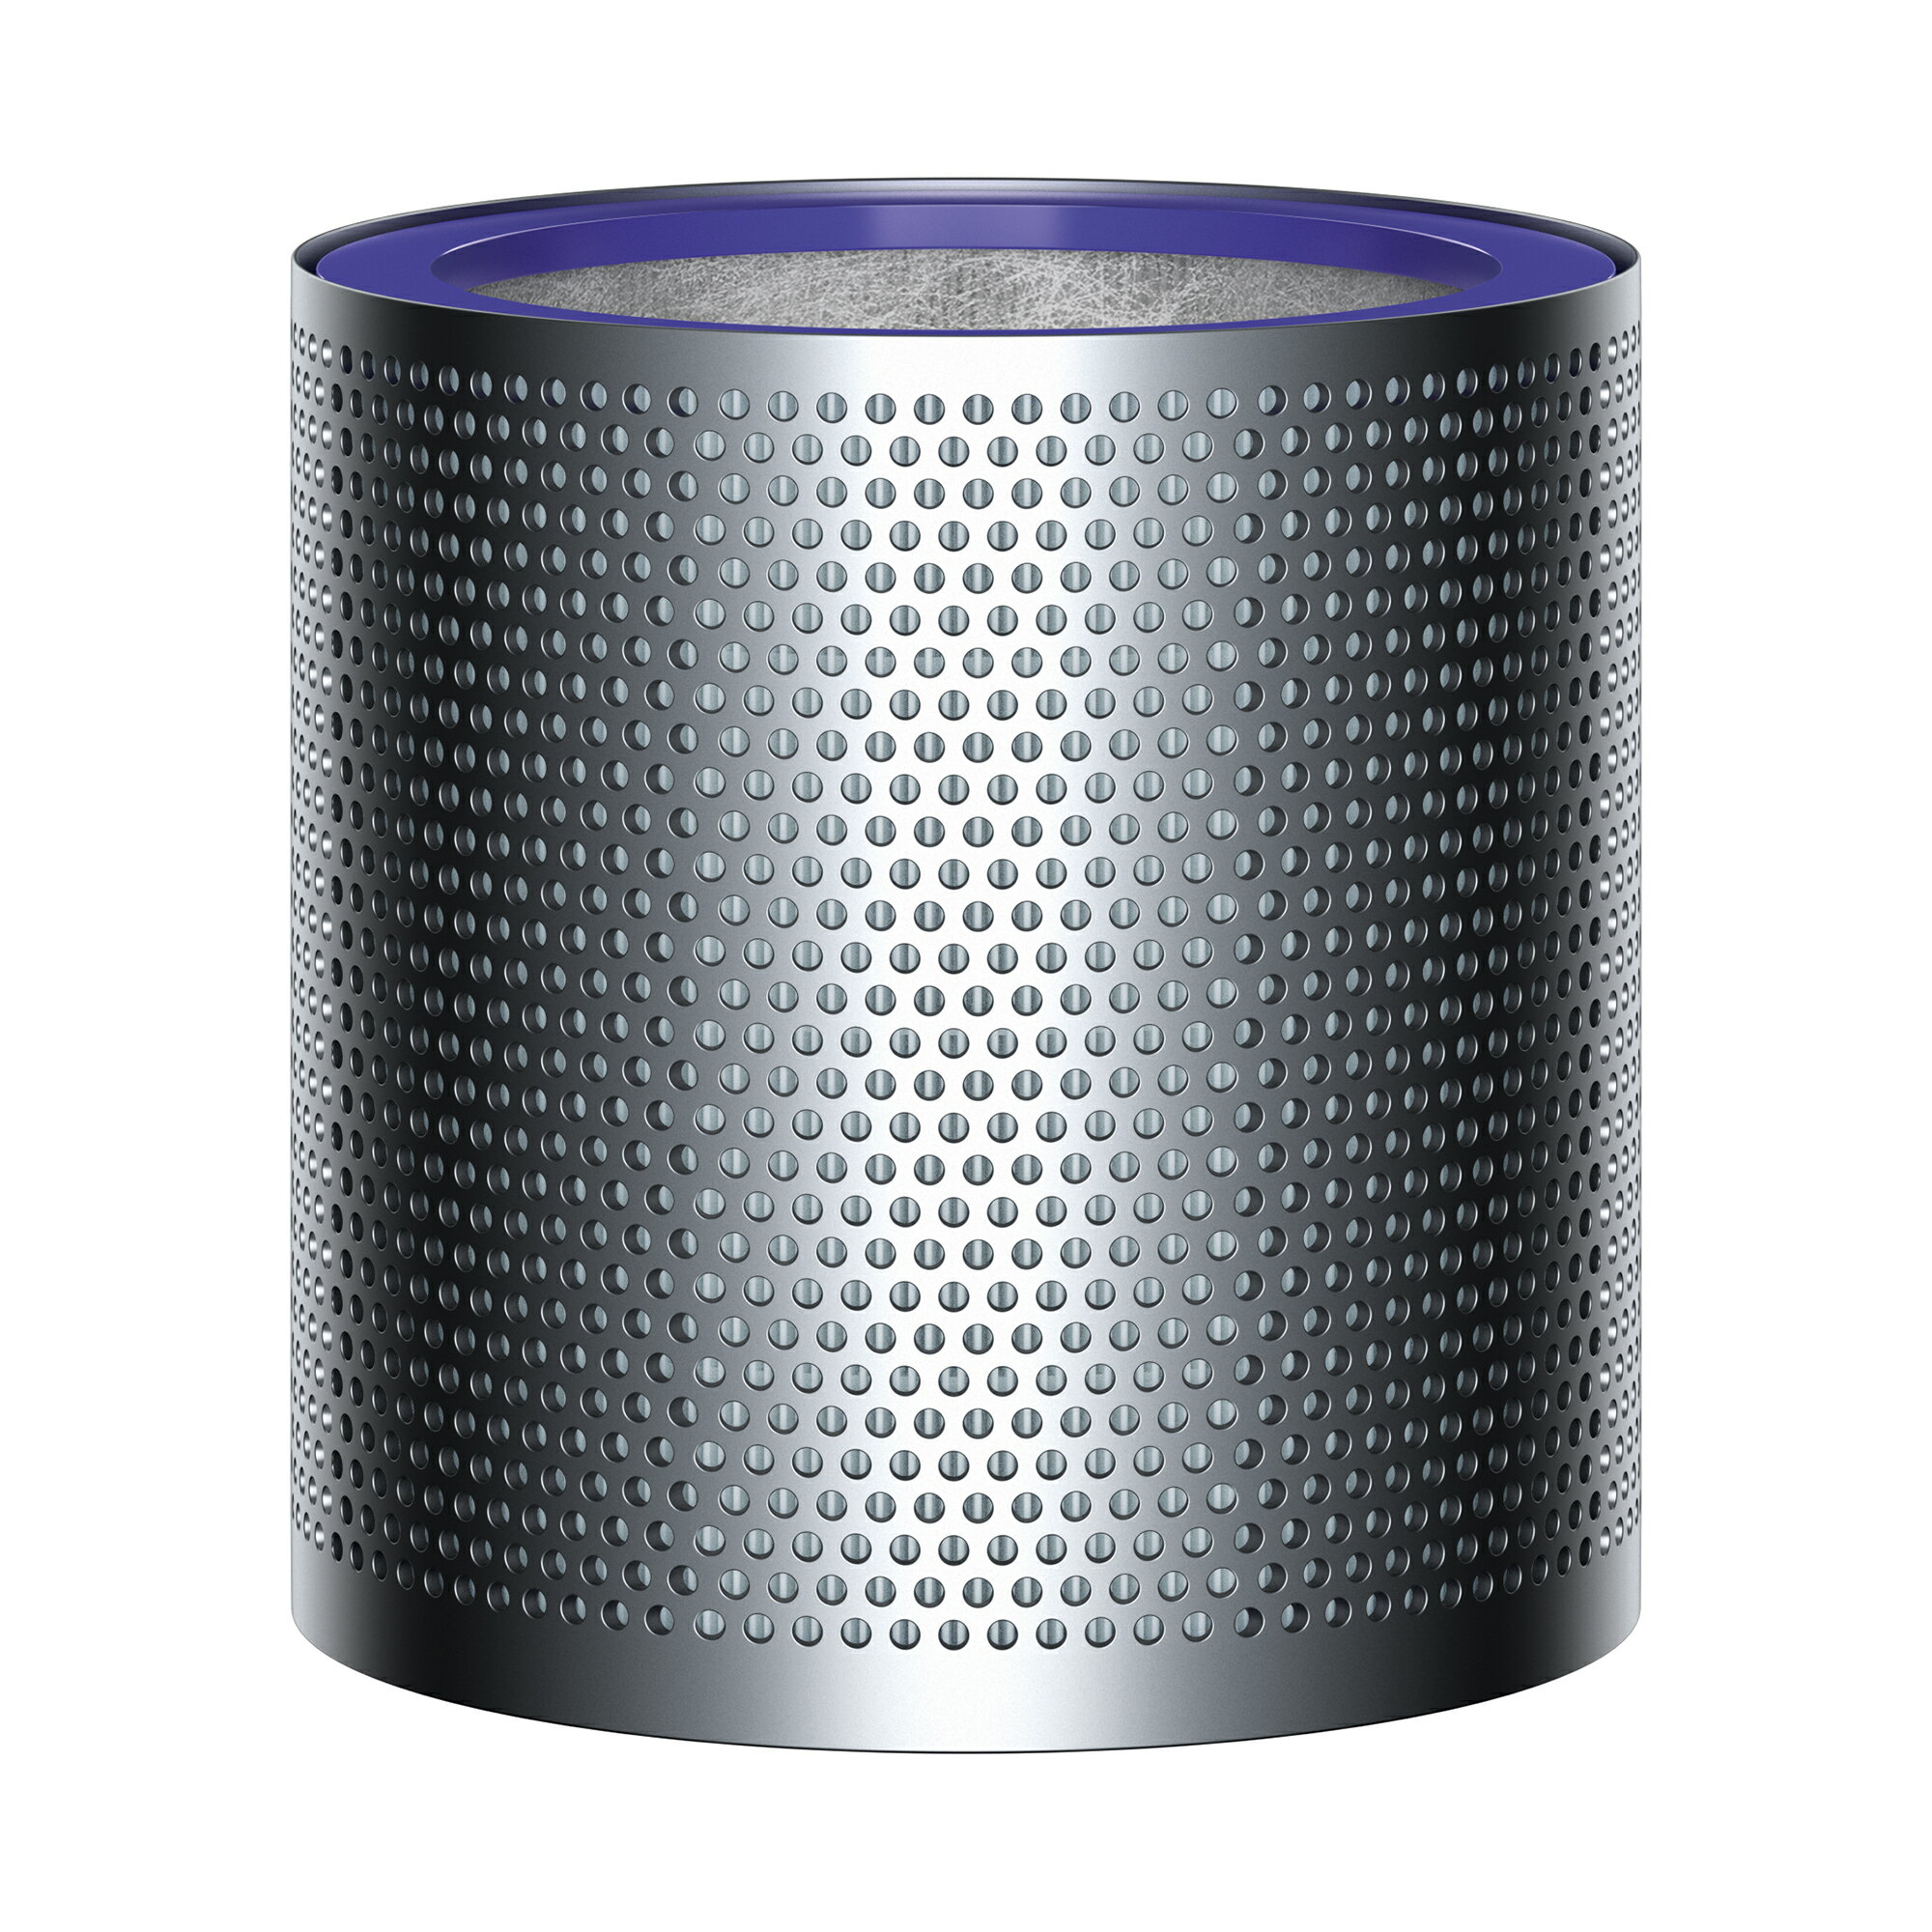 Dyson tp02 pure cool link connected tower air purifier fan